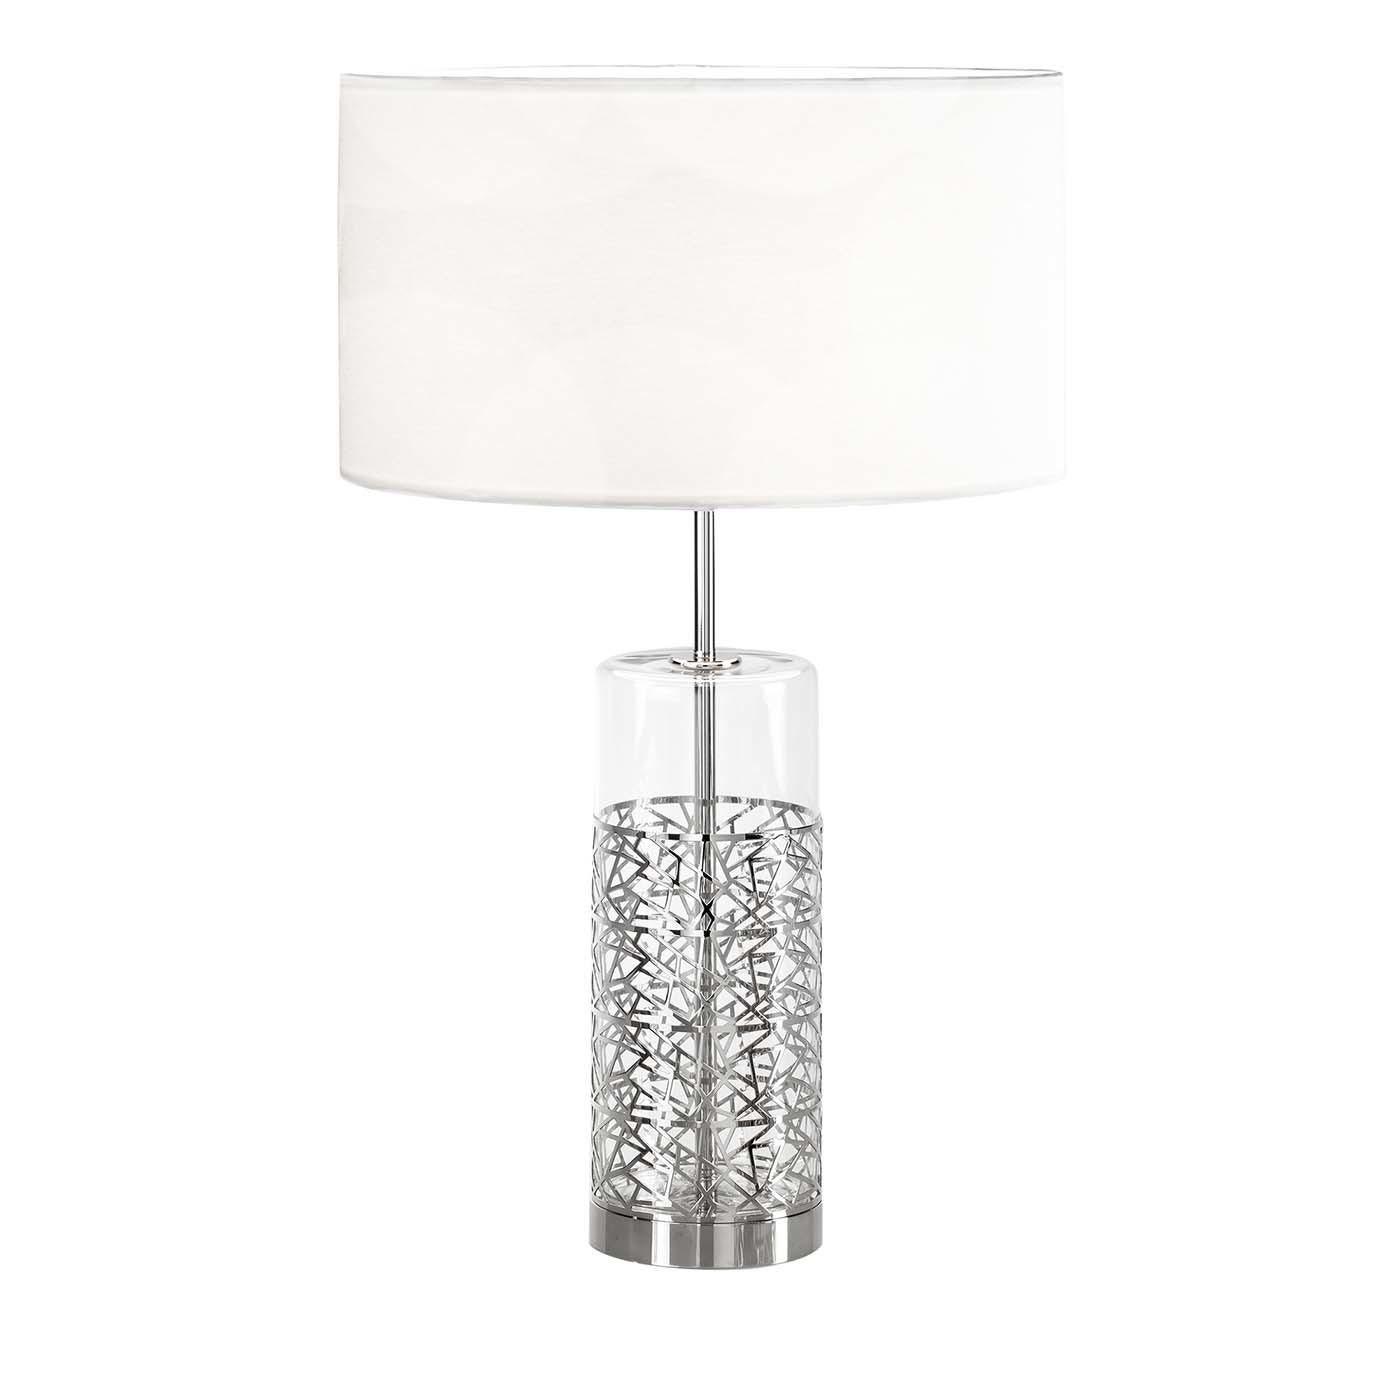 The refinement of this splendid table lamp lies in the captivating combination of solids and voids. Its frame is in chrome-plated metal and comprises a circular base from which rises a central stem. The stem is surrounded by a cylindrical element